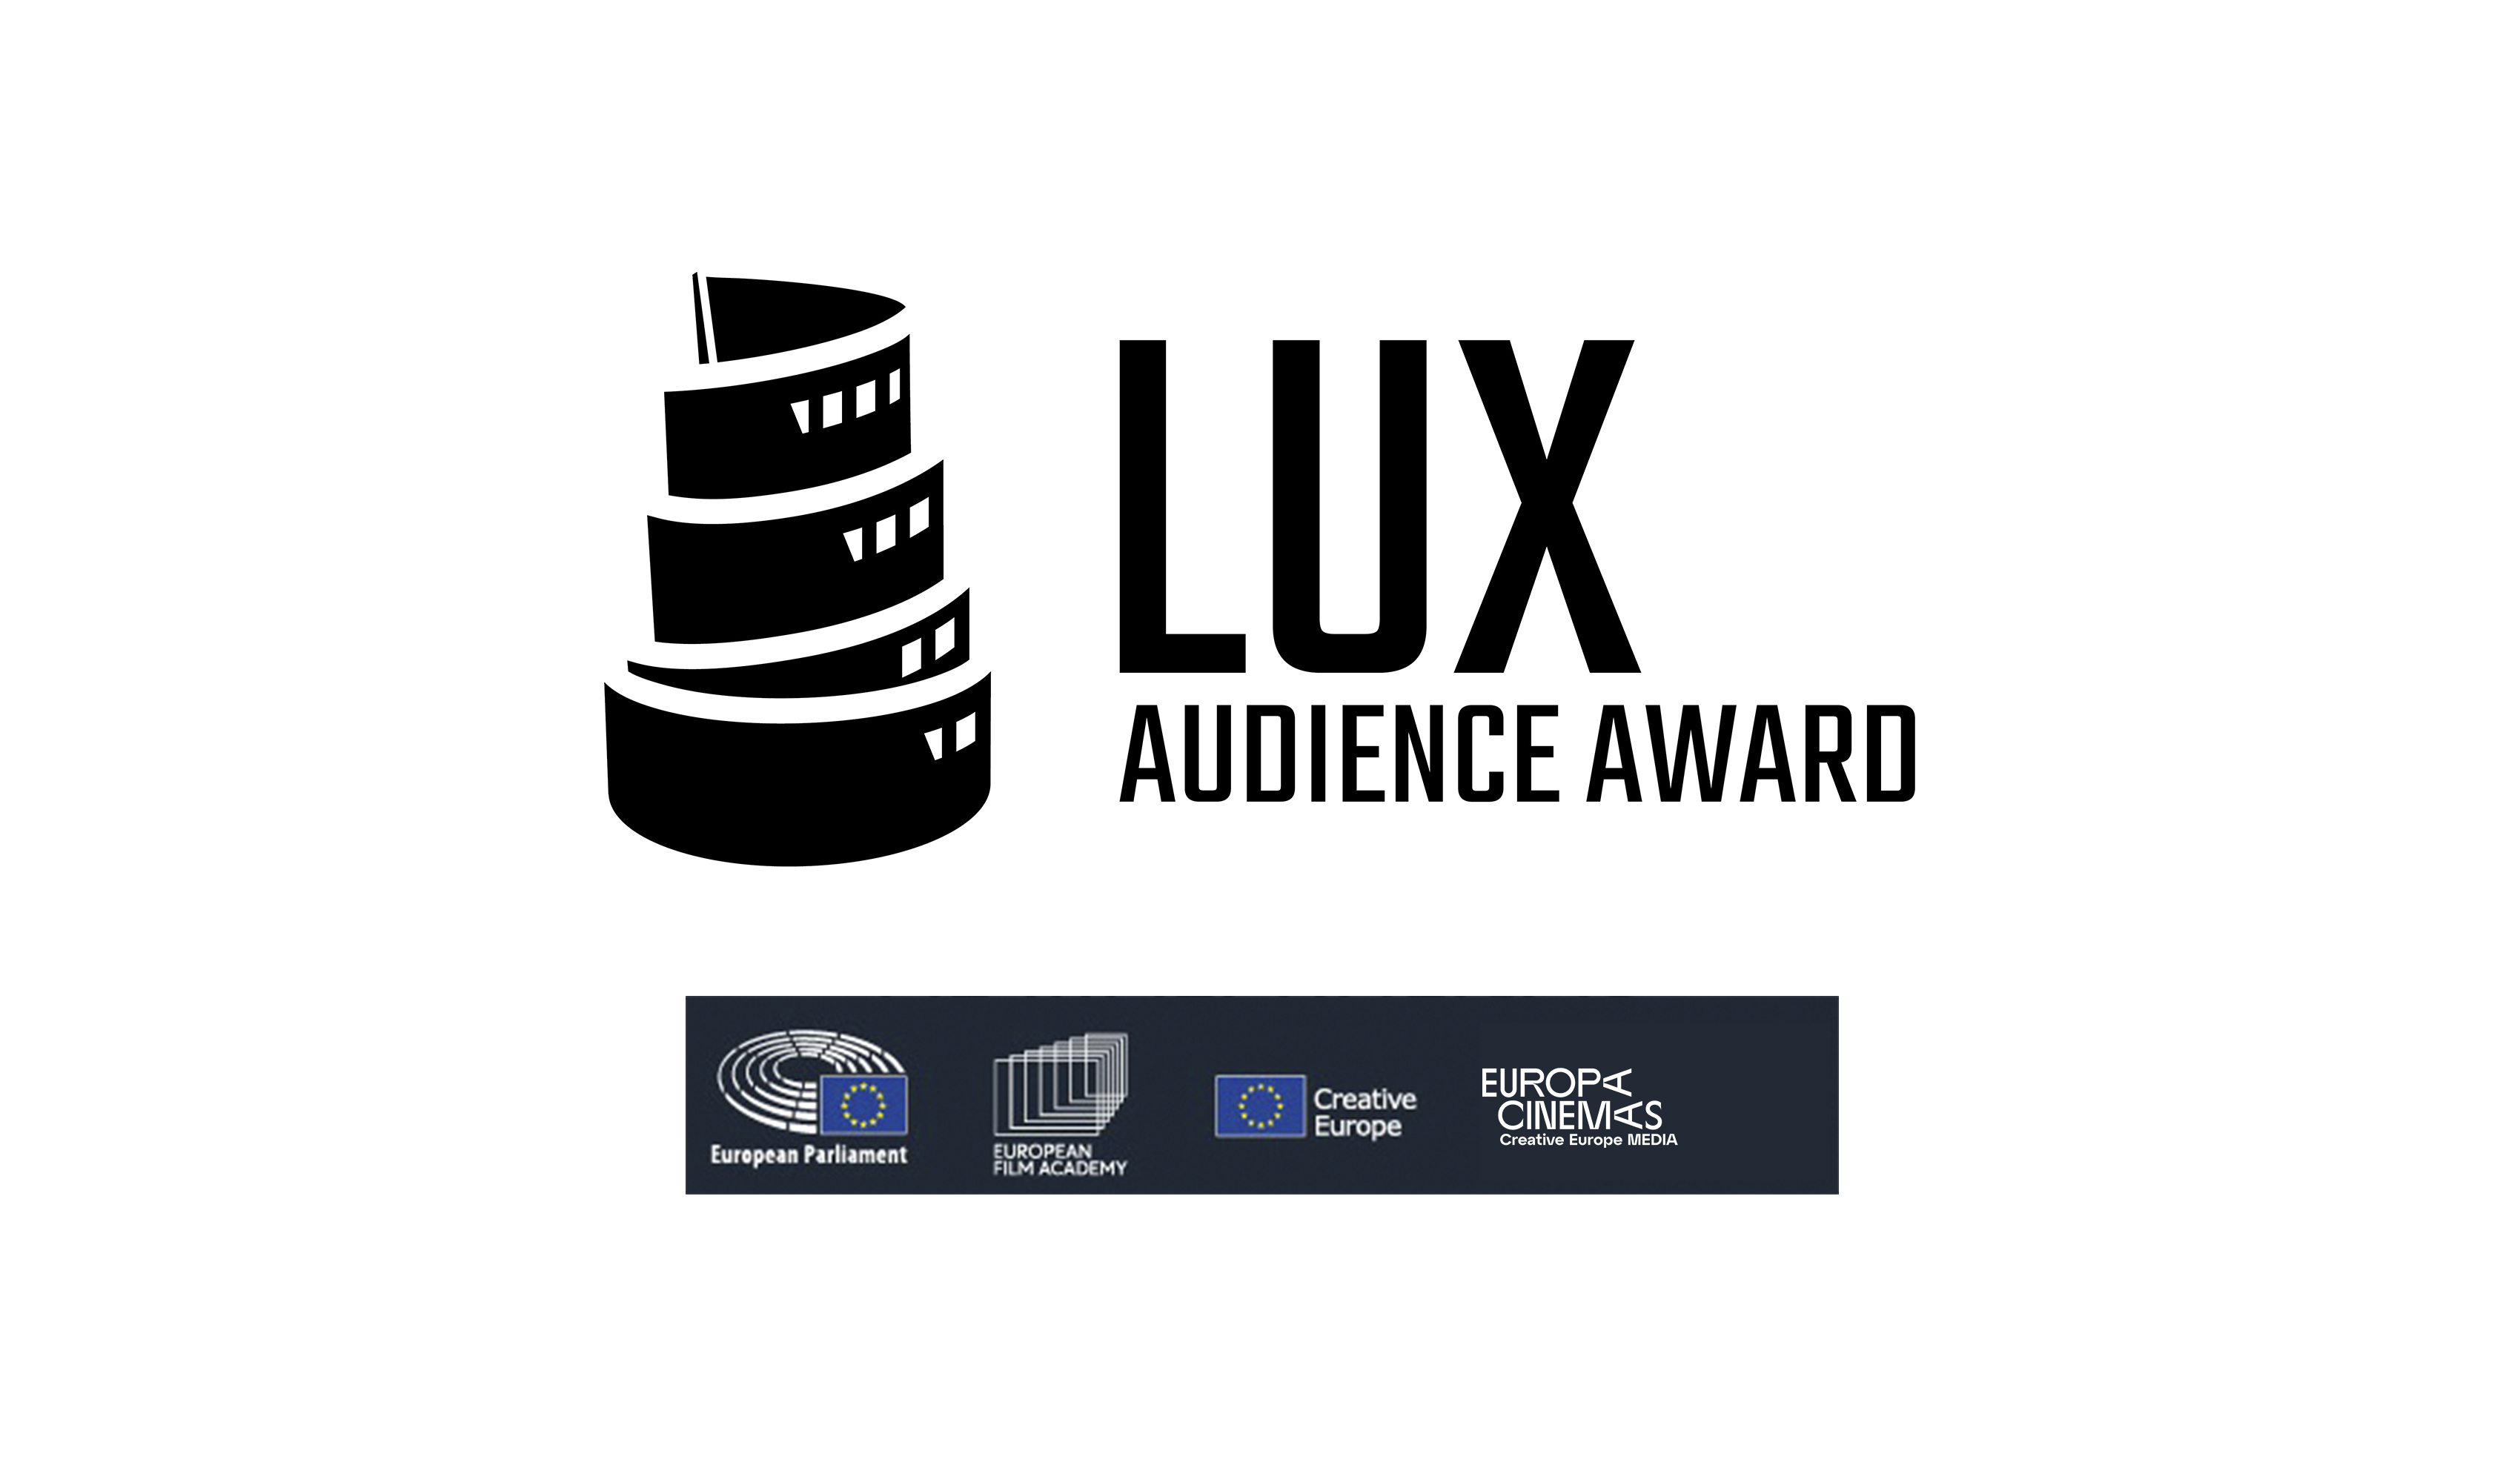 LUX AUDIENCE AWARD